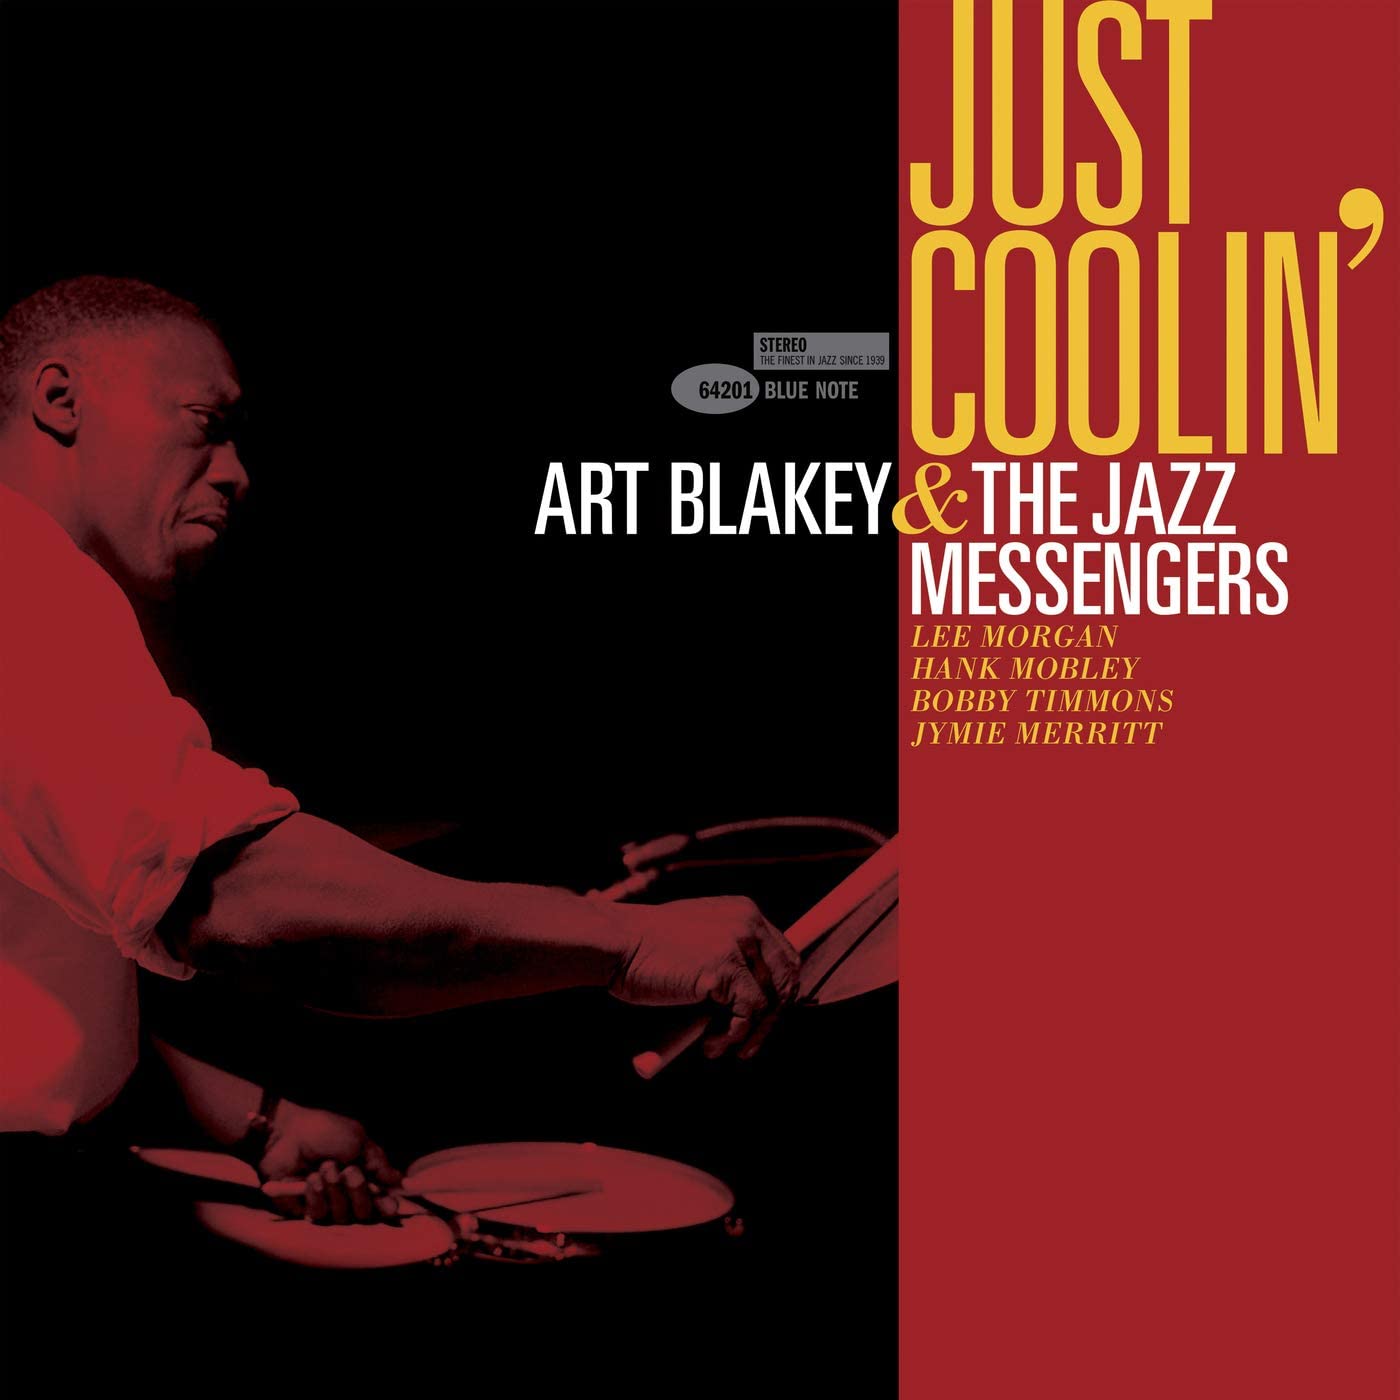 Blakey, Art and The Jazz Messengers/Just Coolin' [LP]